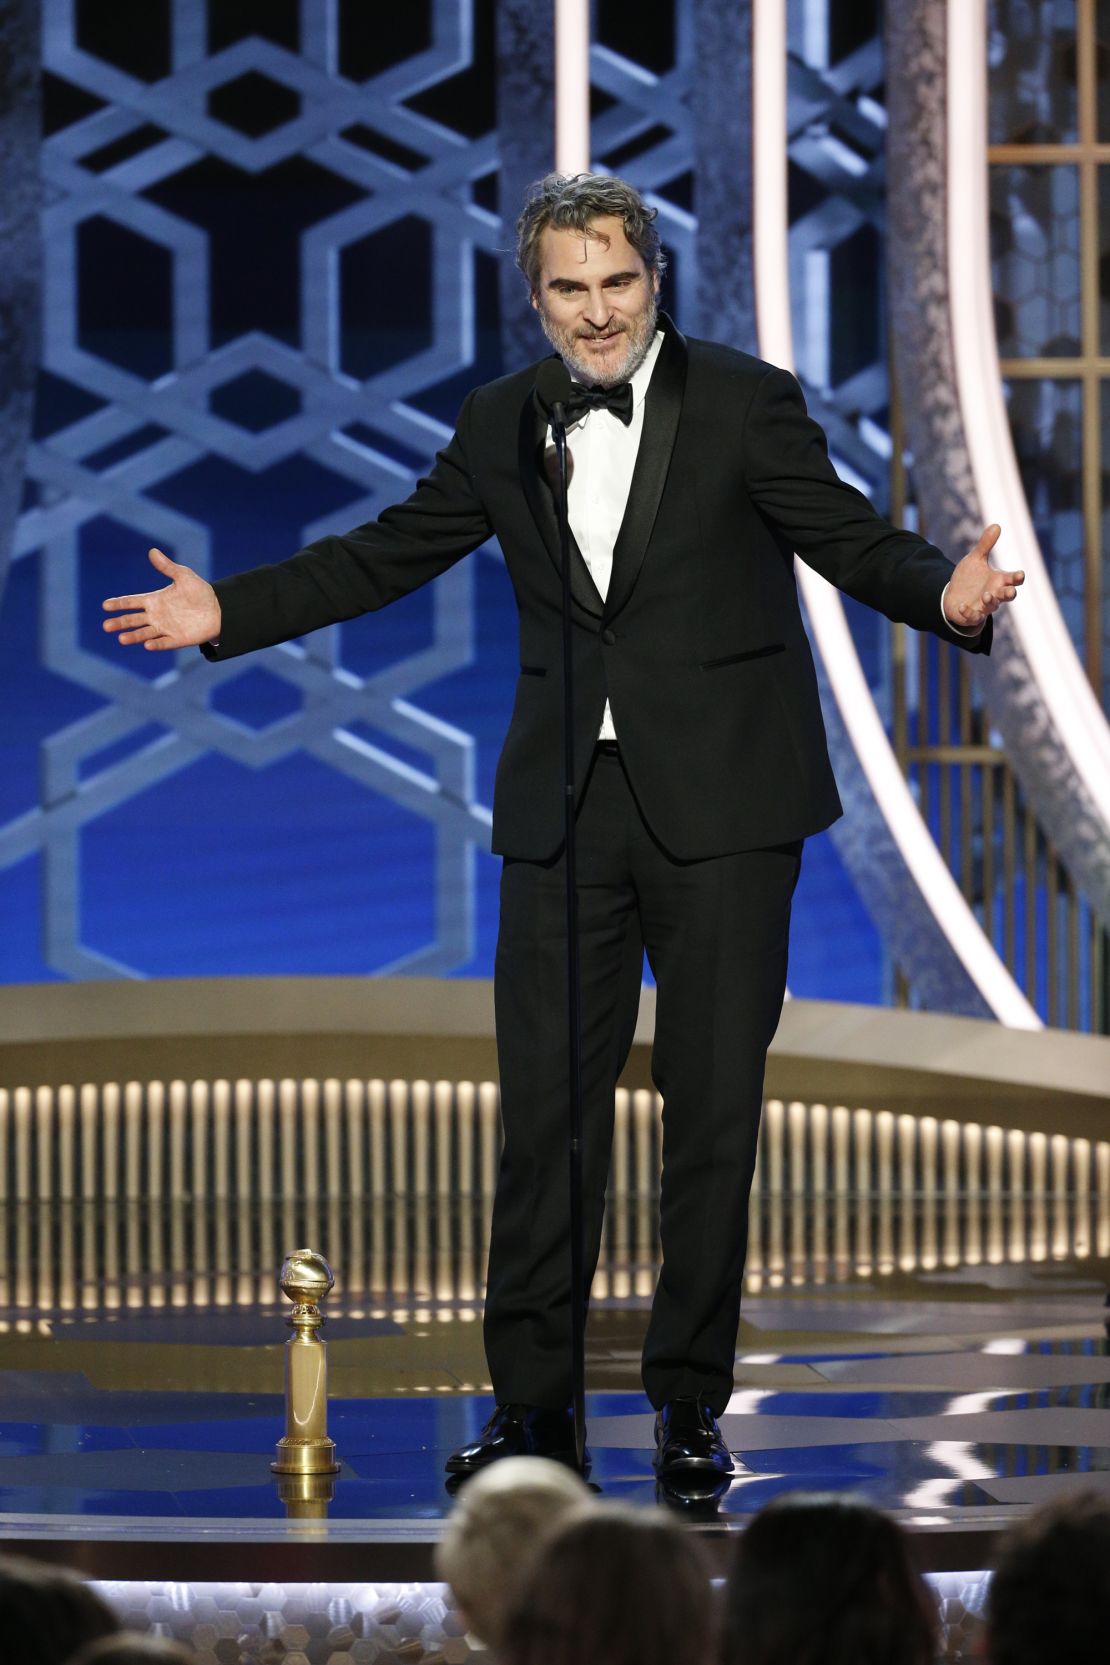 Joaquin Phoenix won the award for best actor in a drama film at the Golden Globes on January 5.